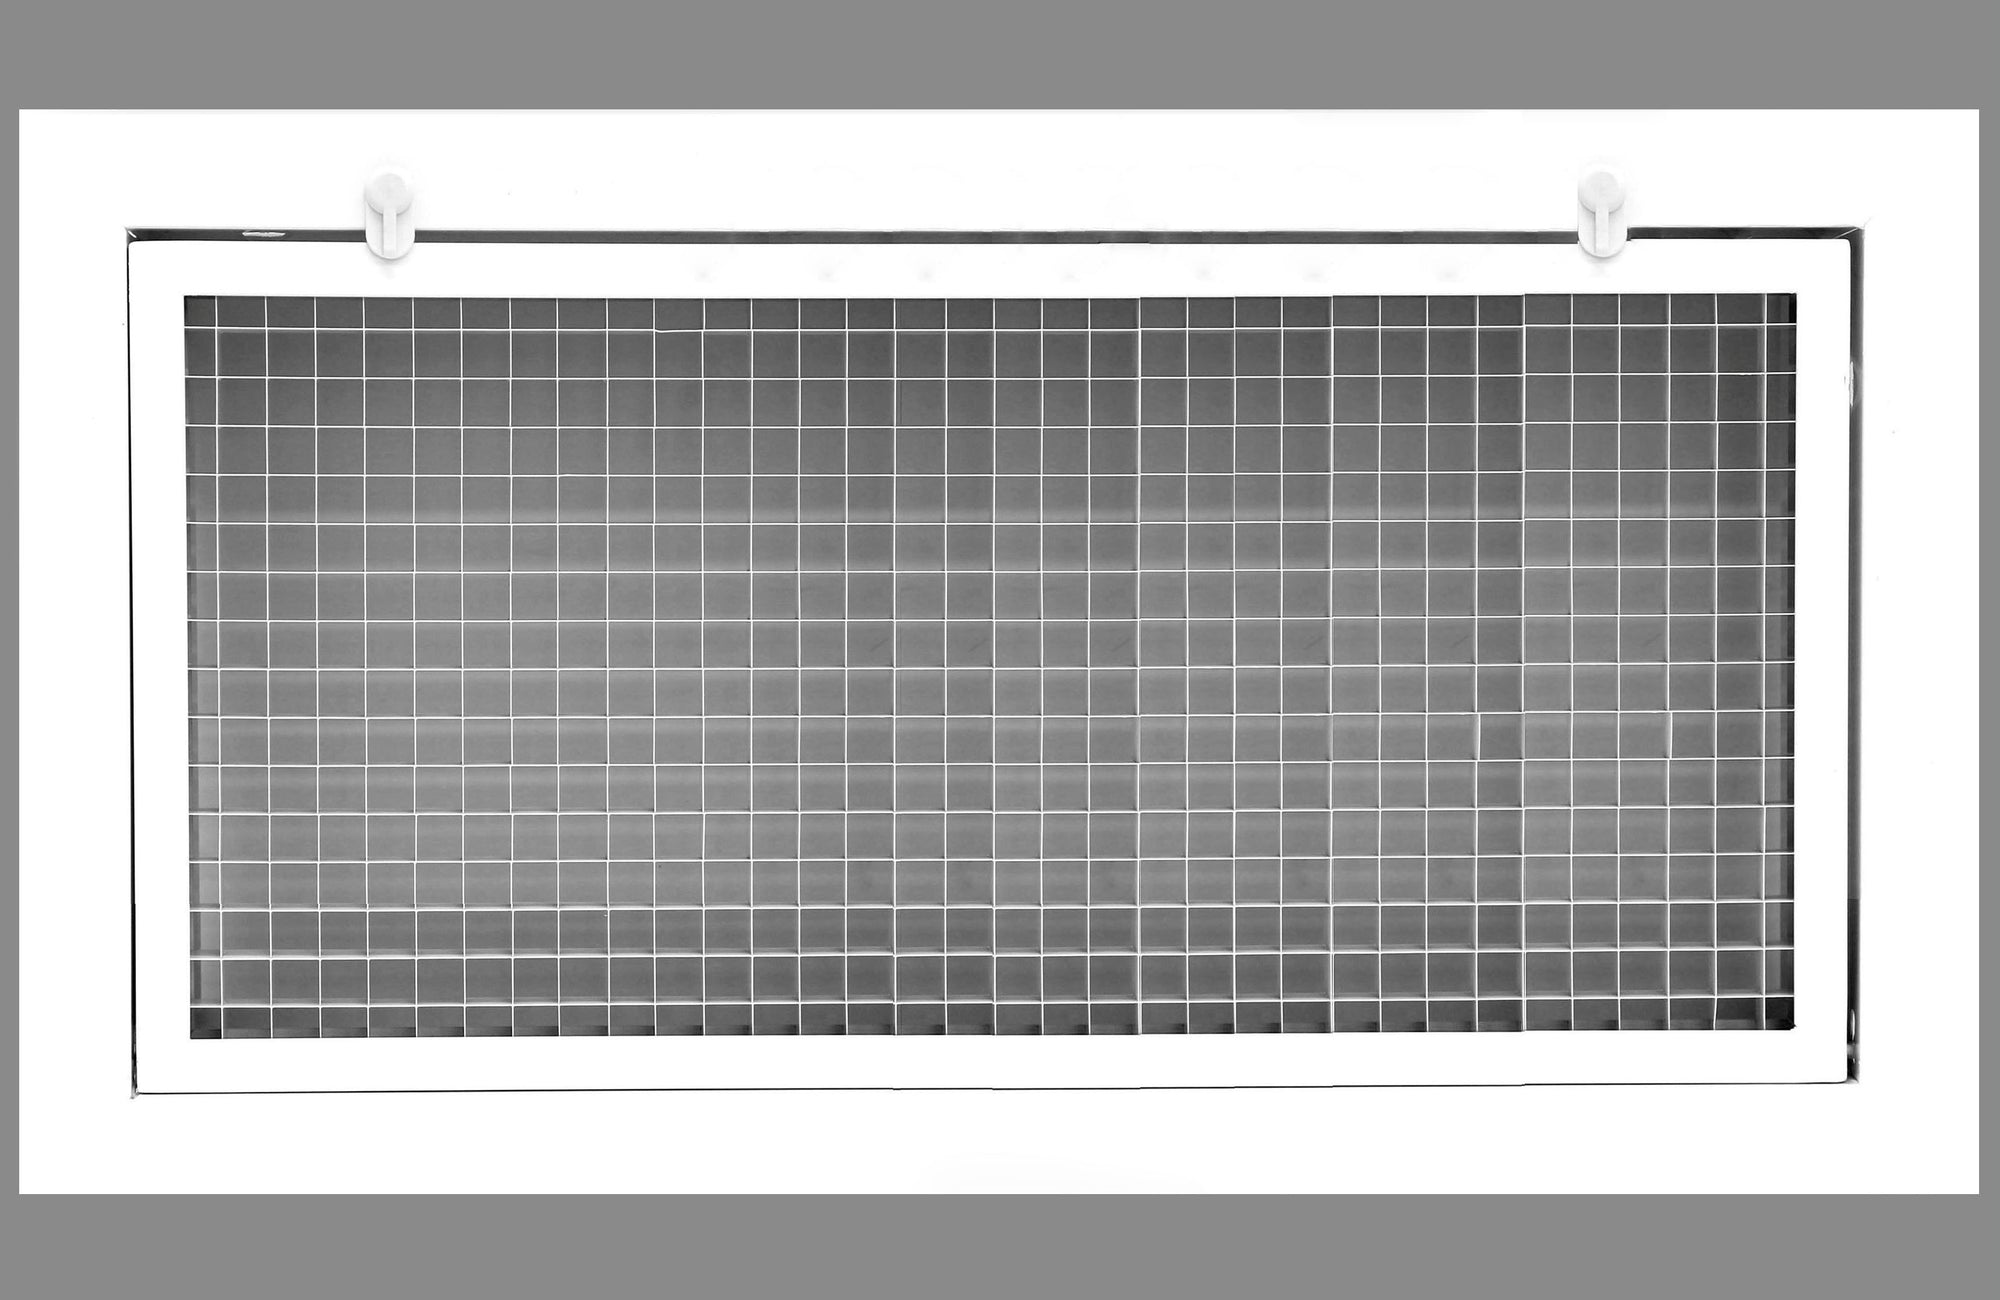 30" x 16" Cube Core Eggcrate Return Air Filter Grille for 1" Filter